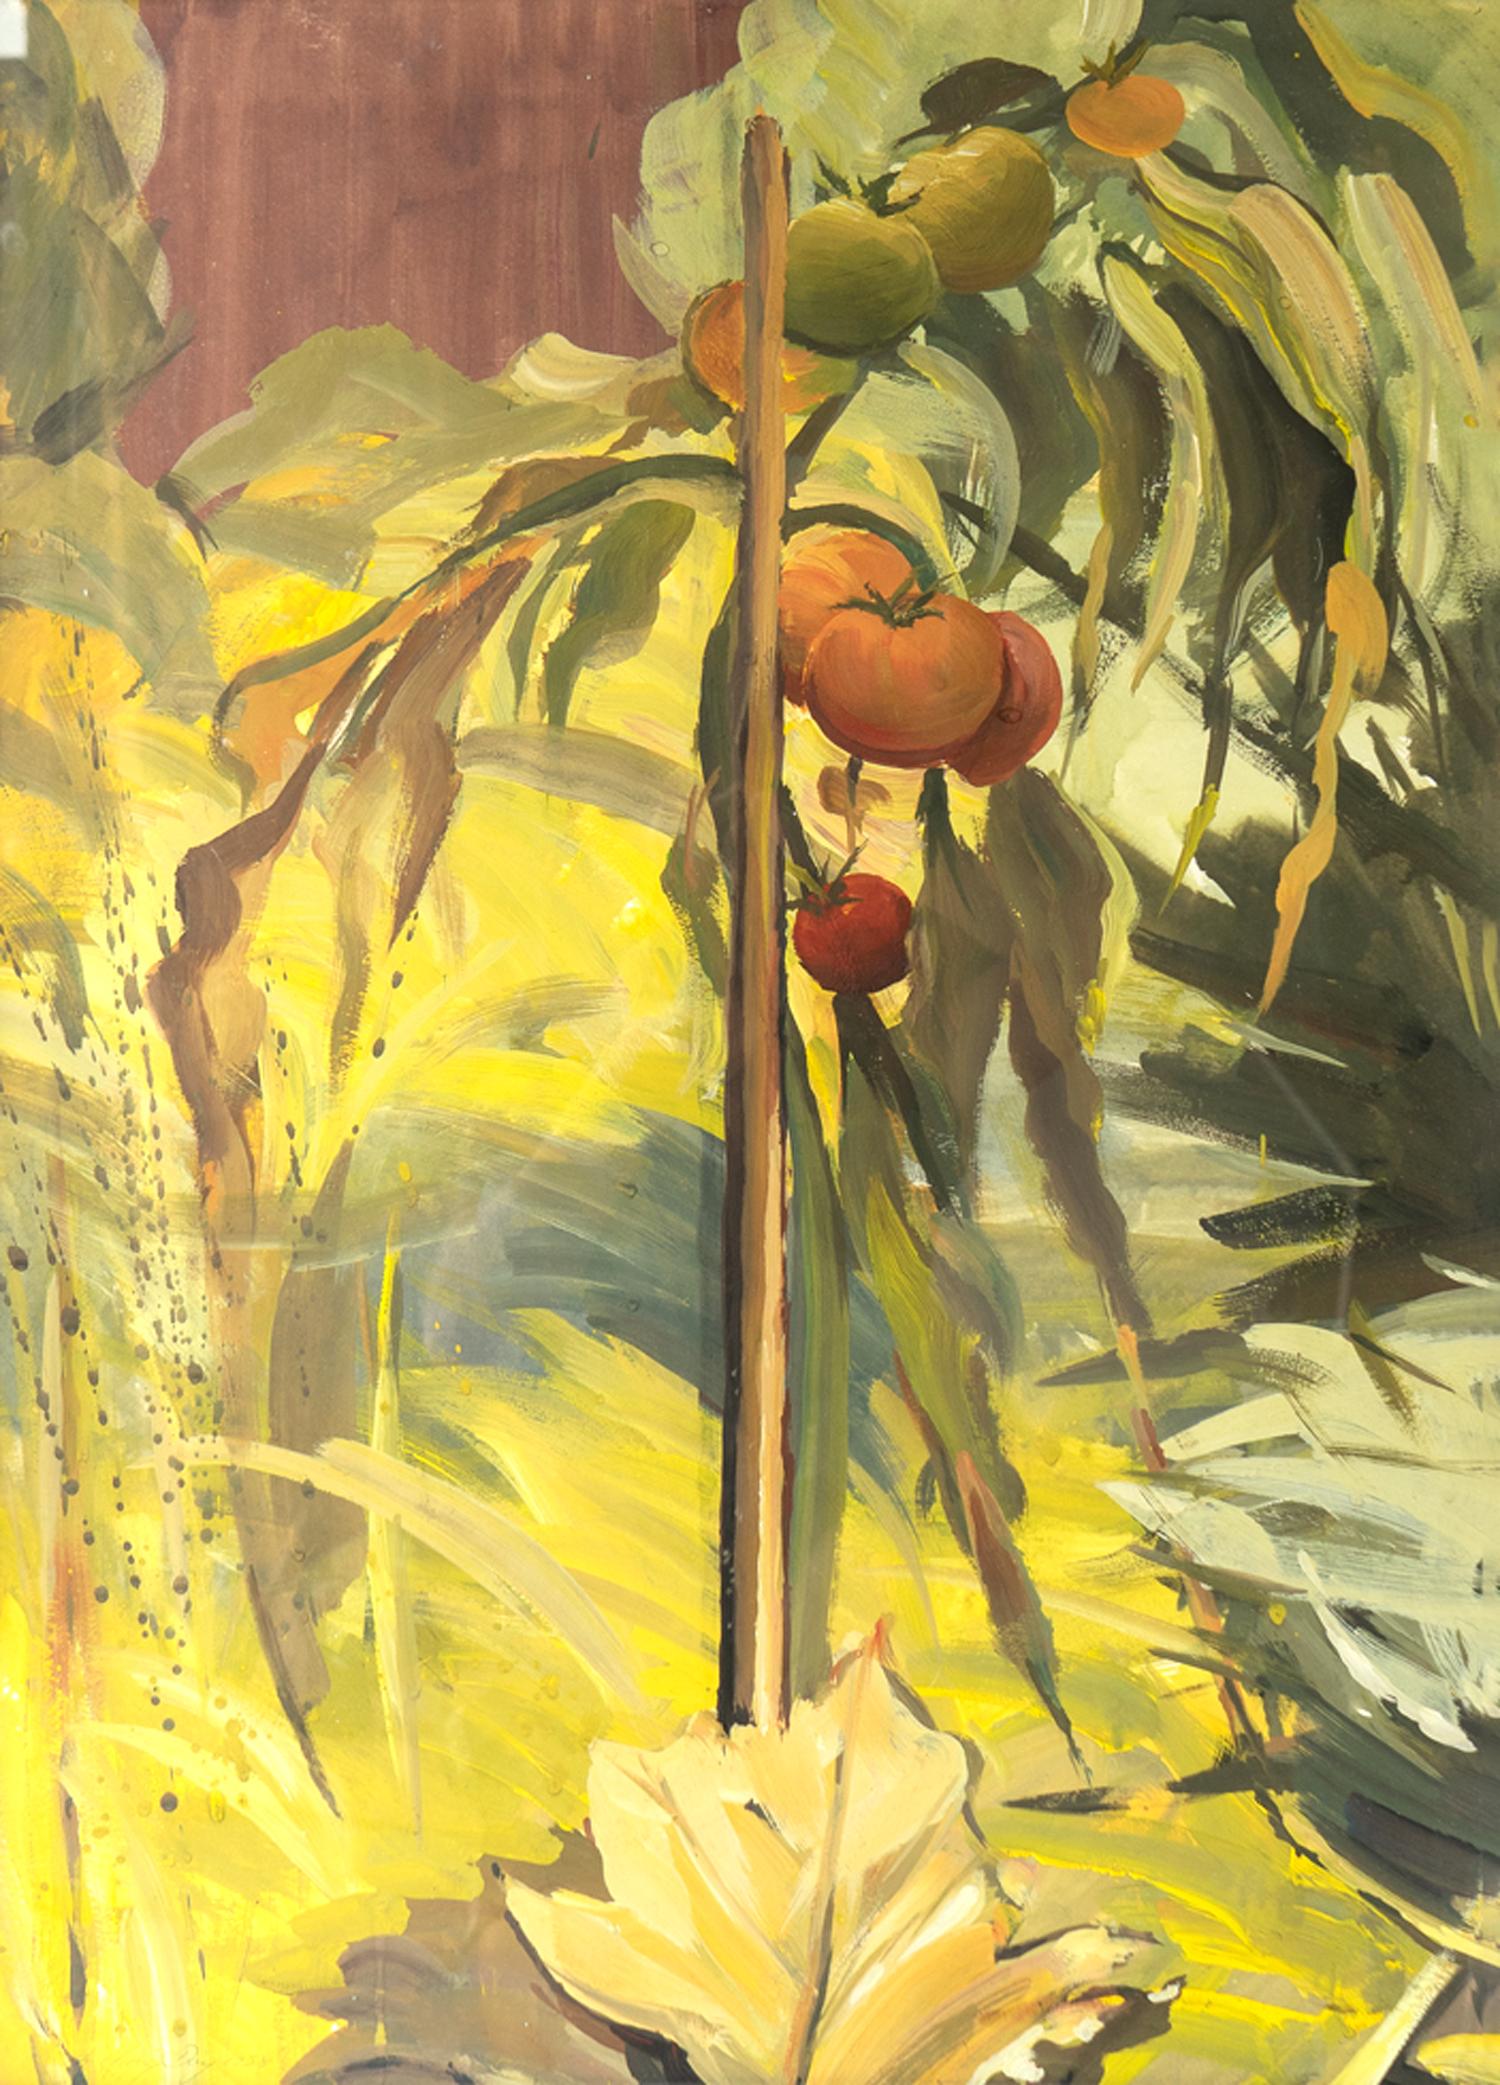 'Tomato Plant In Autumn' By Anthony Day, Large Original Vintage Gouache Painting